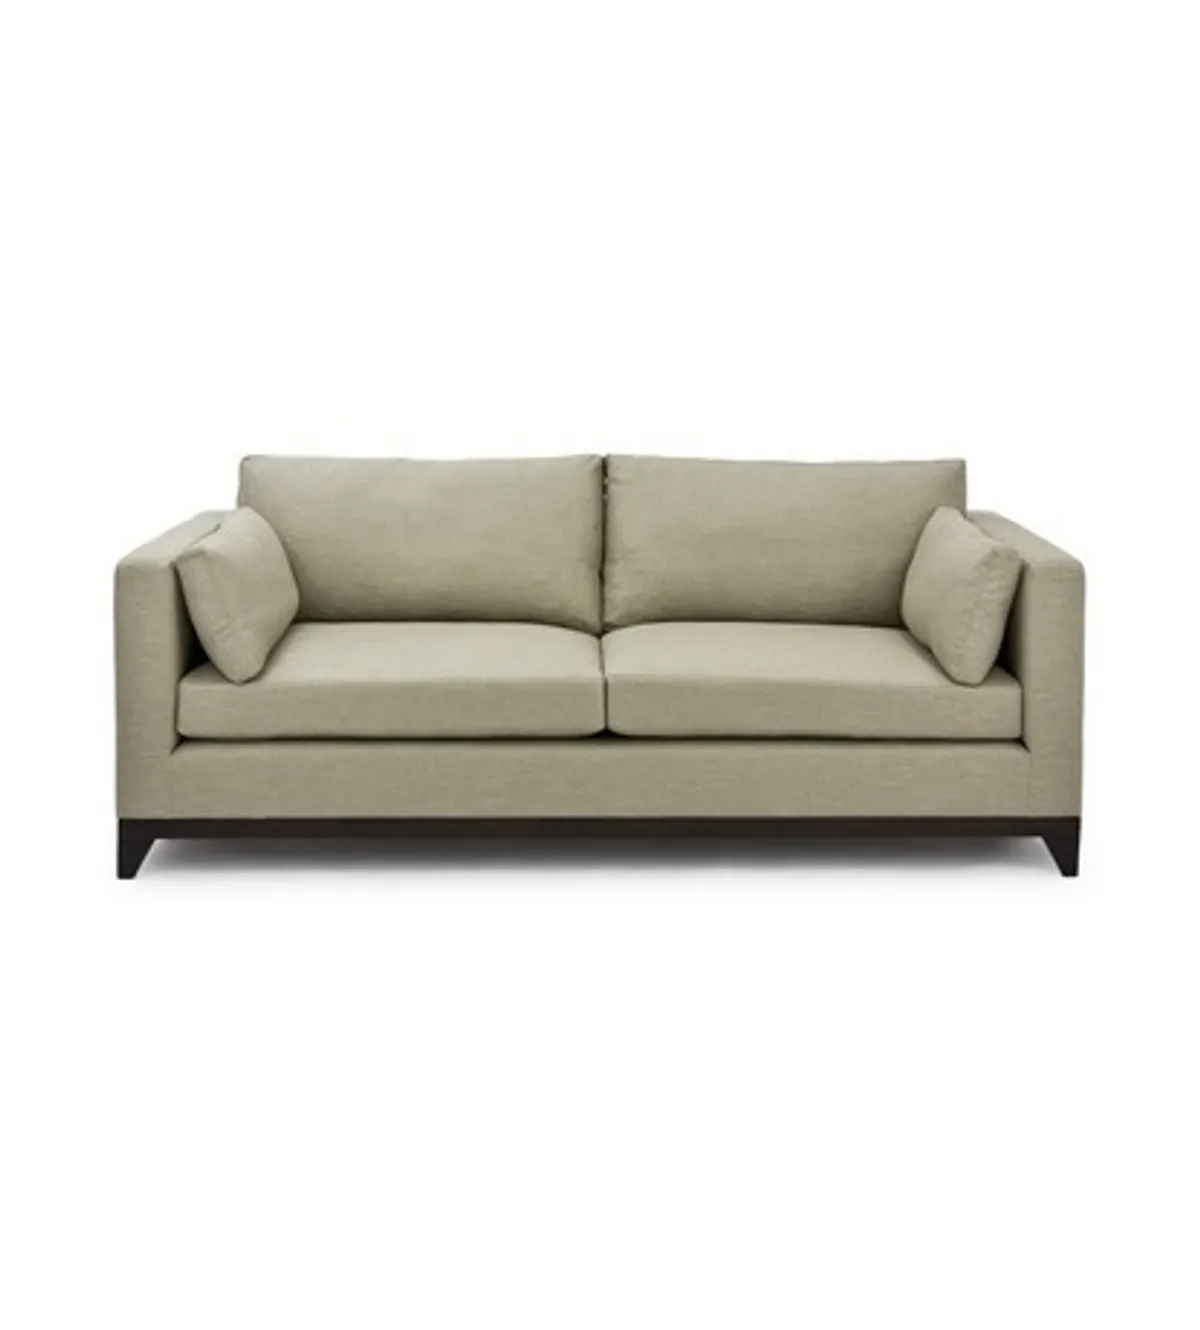 Lucca Sofa By Inside Out Contracts